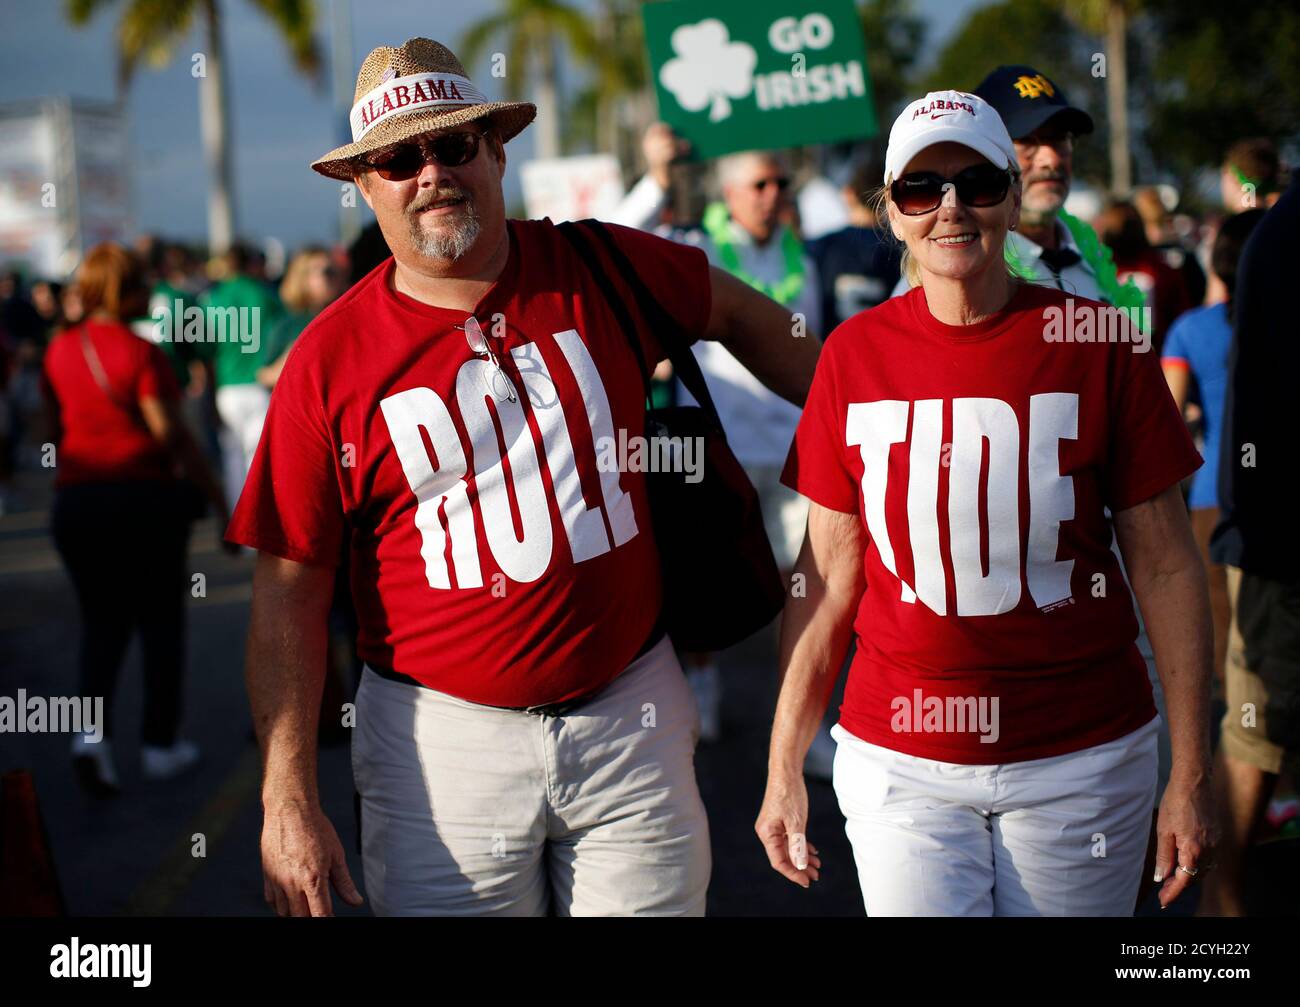 Alabama Crimson Tide fans wear Roll Tide shirts outside Sun Life stadium  before the BCS National Championship college football game between Alabama  and the Notre Dame Fighting Irish in Miami, Florida January